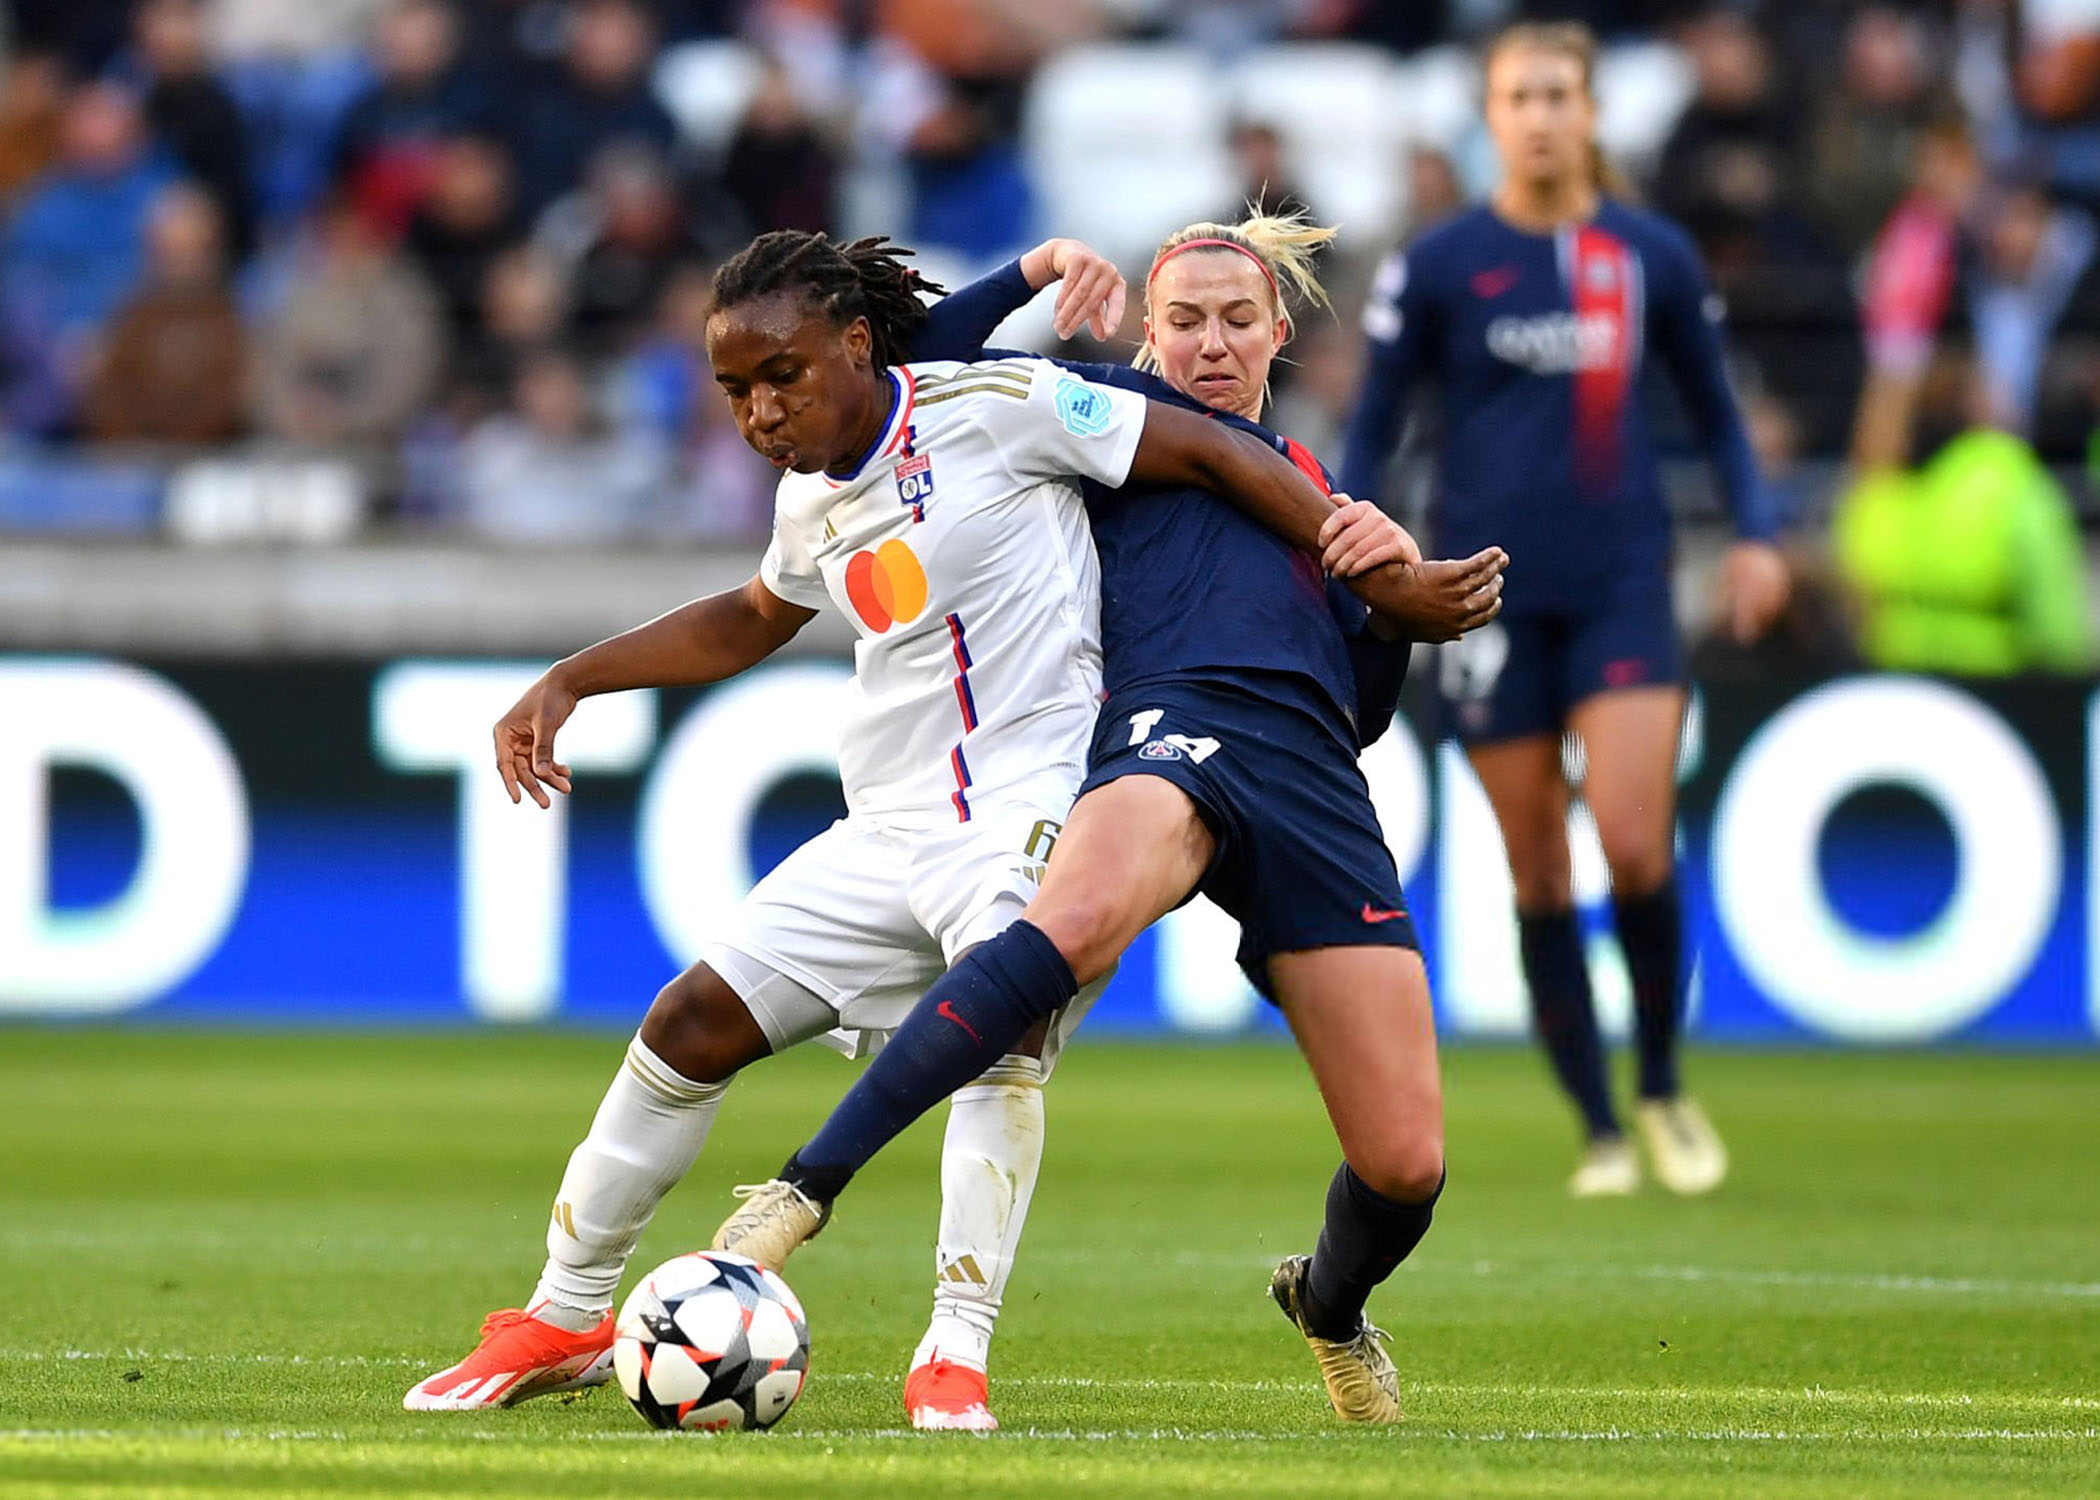 Melchie Dumornay against PSG in the Champions League semi-final first leg on April 20, 2024. Photo: Getty images